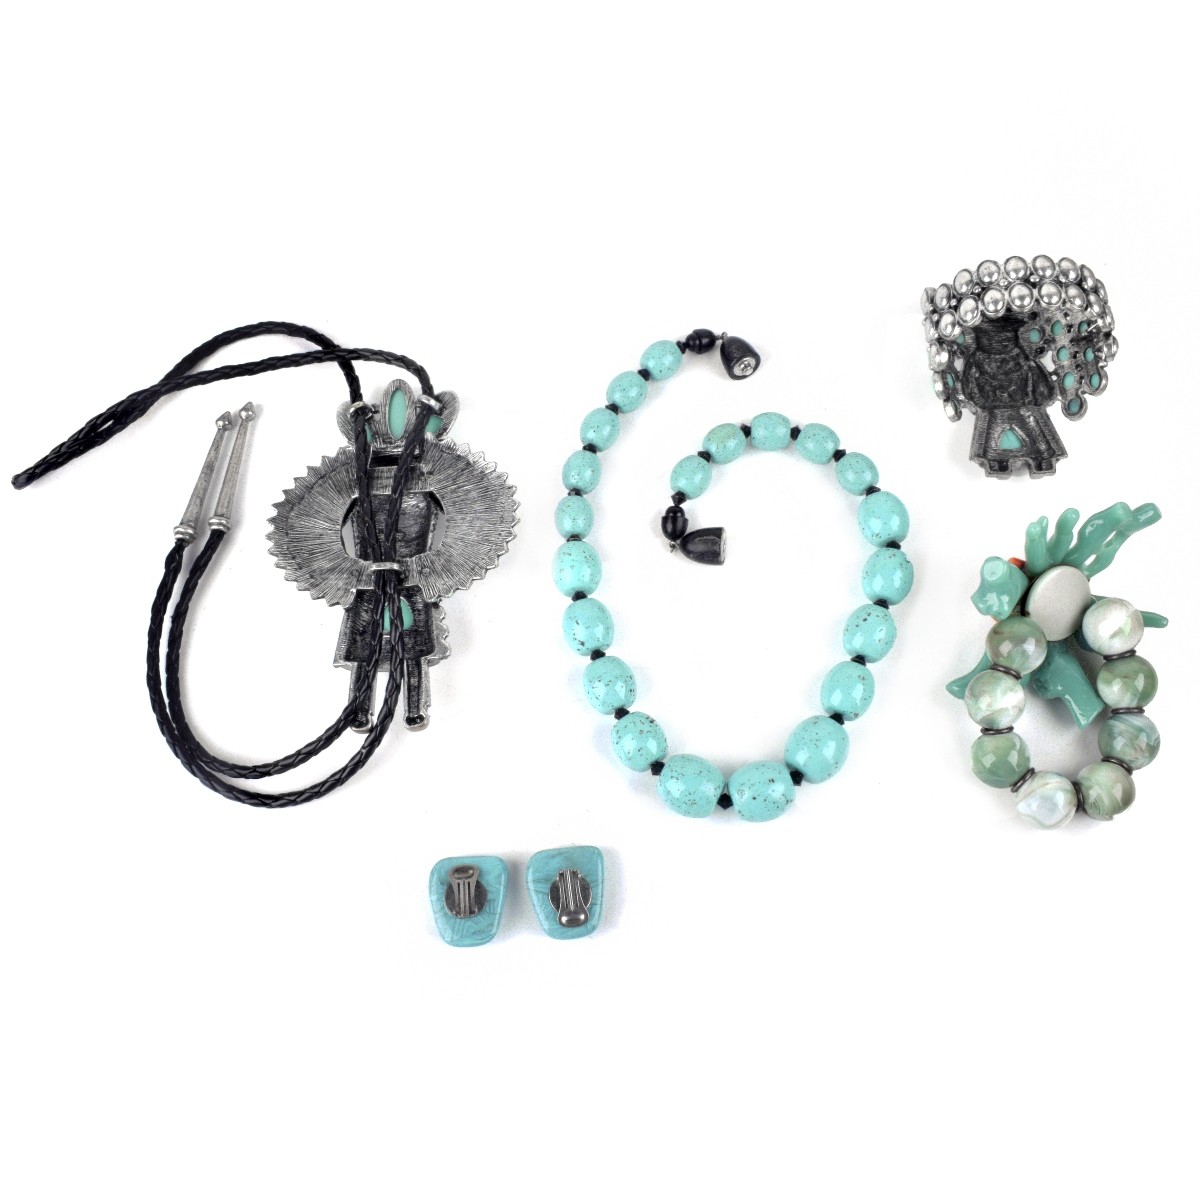 Imitation Turquoise Jewelry Collection